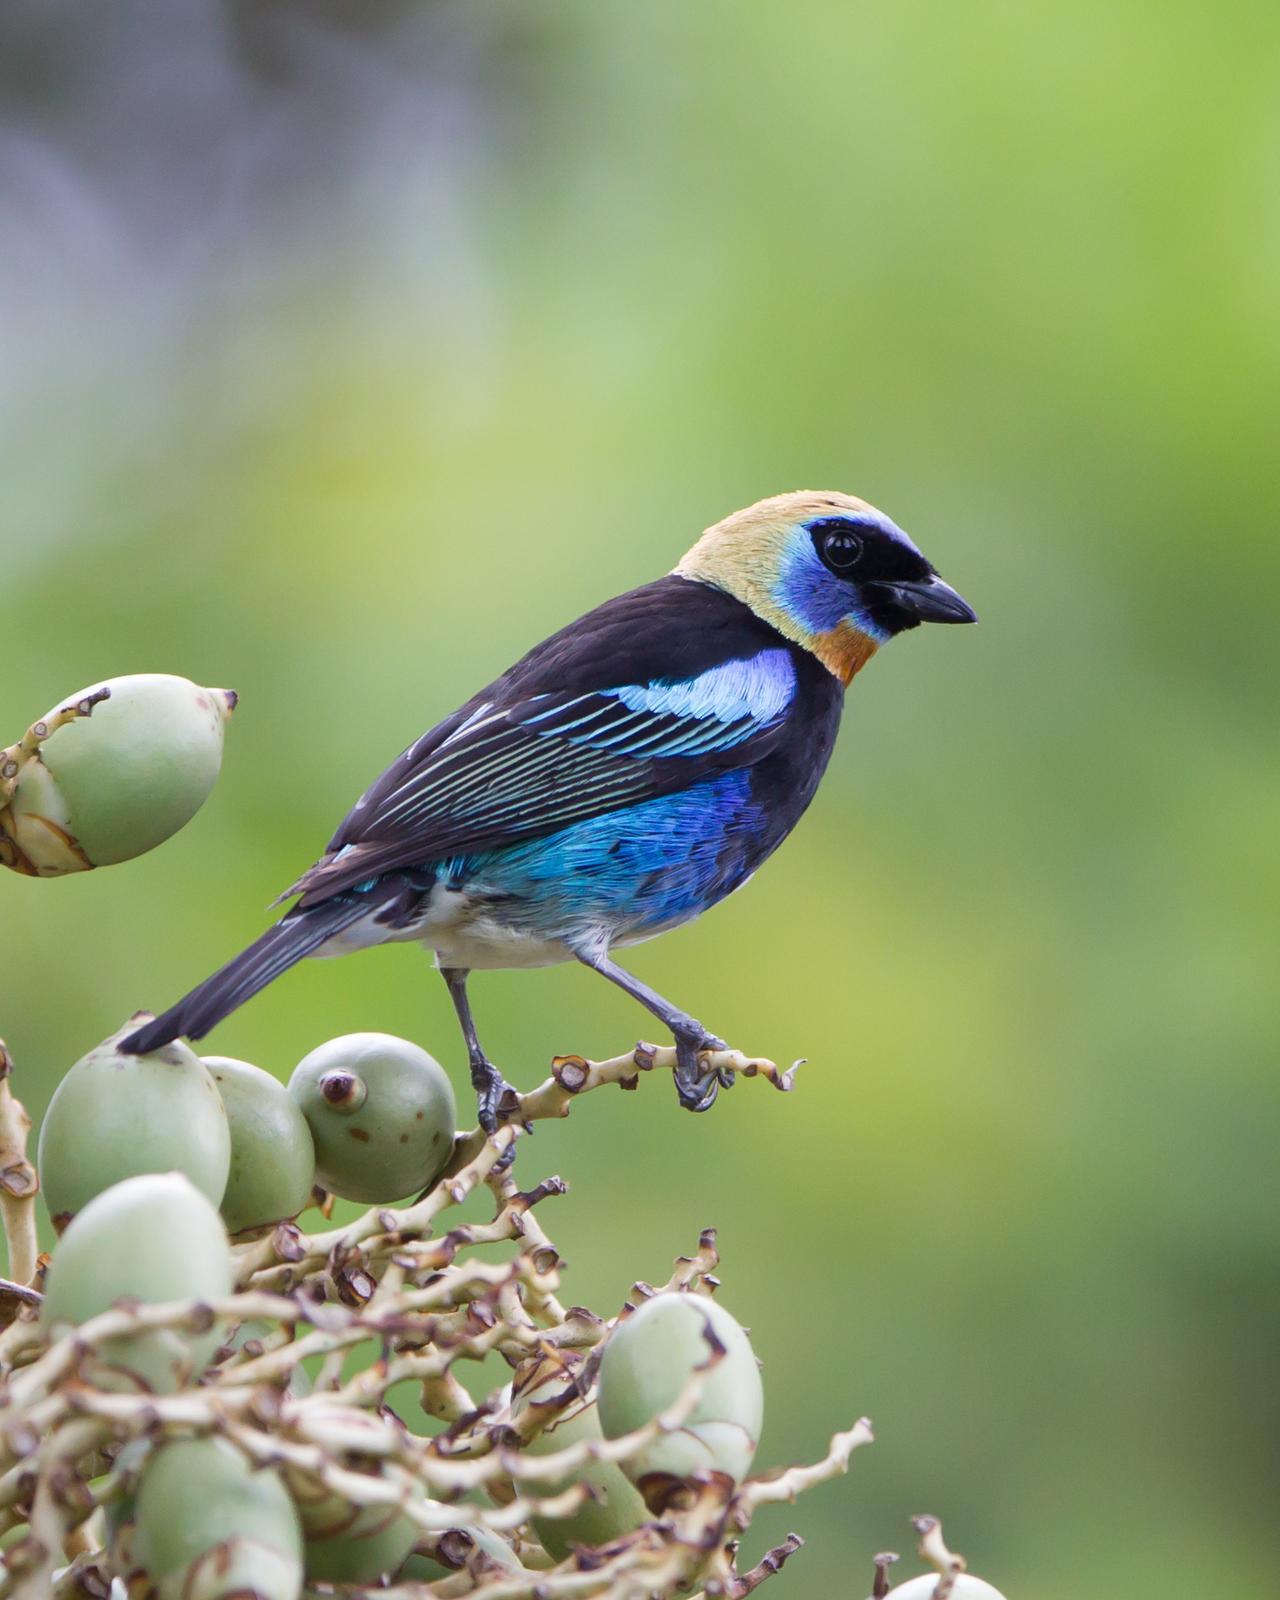 Golden-hooded Tanager Photo by Kevin Berkoff